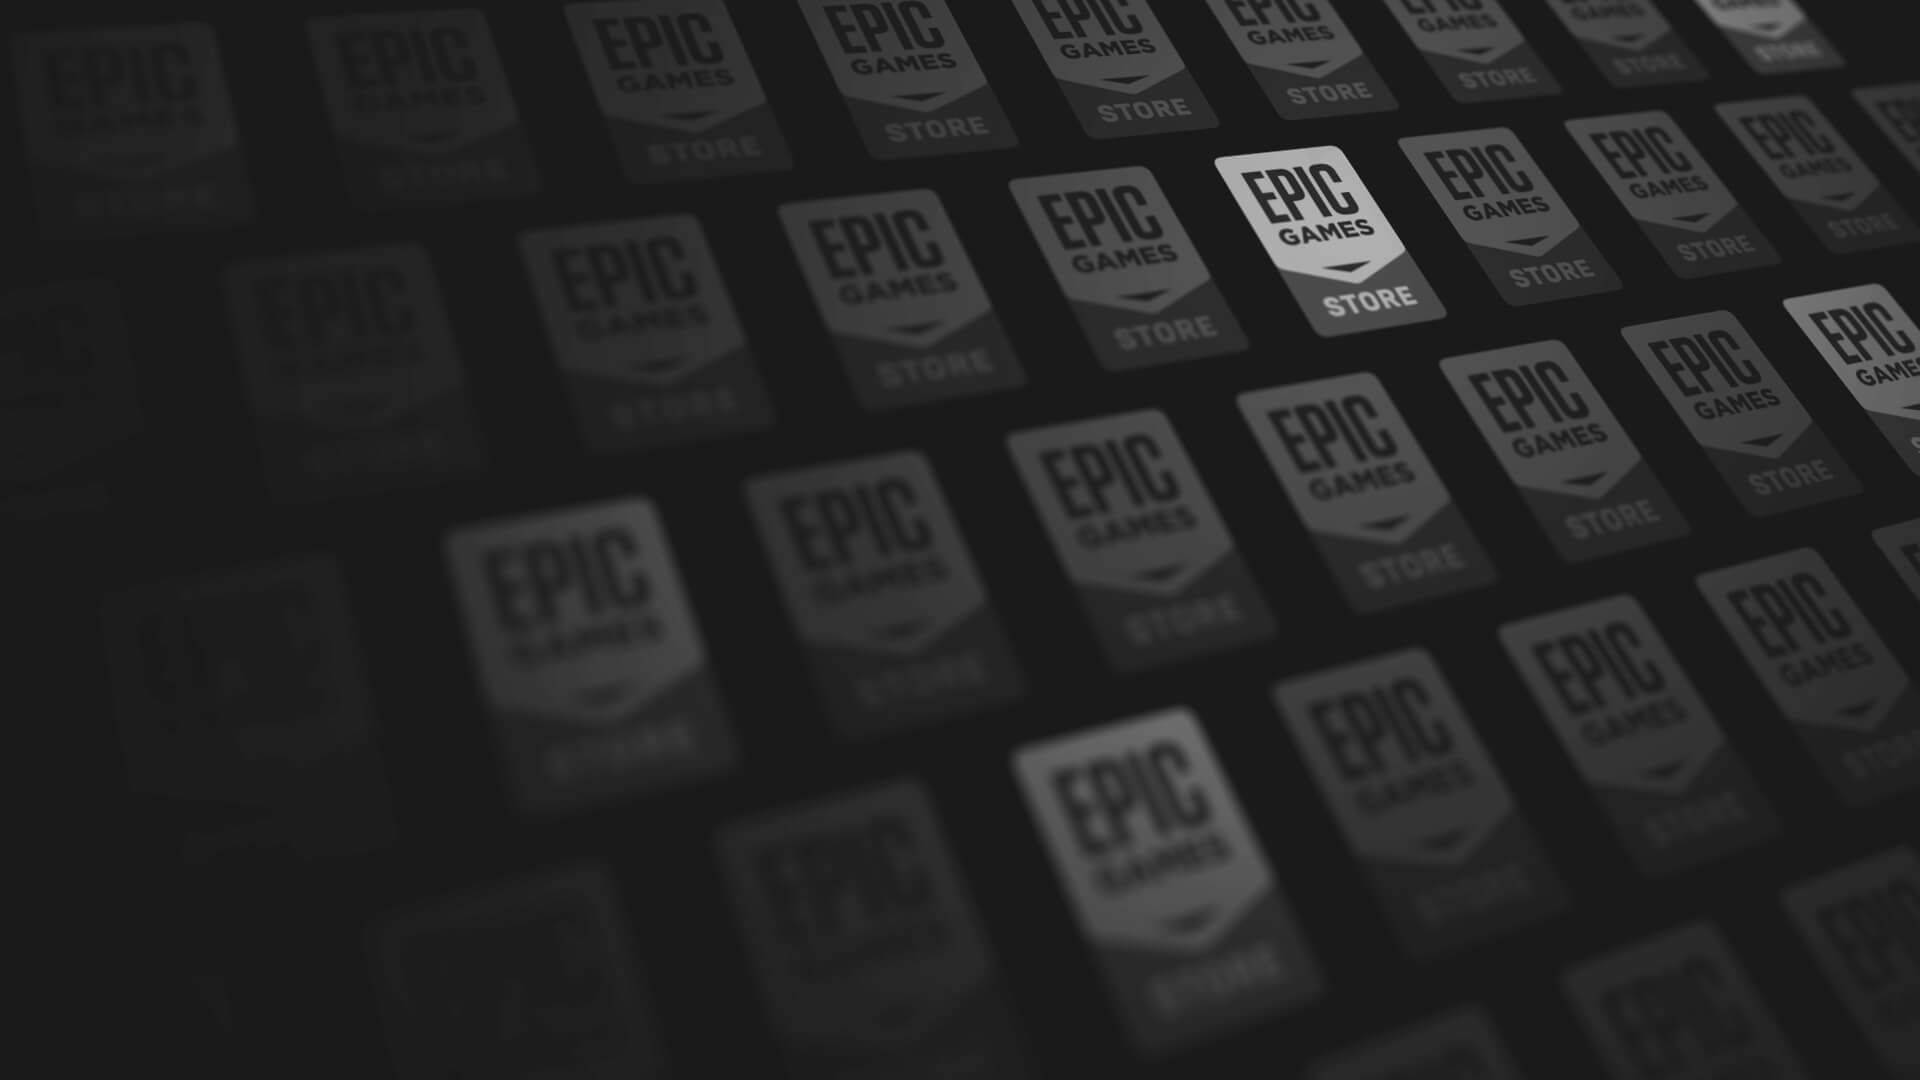 Epic Games Store Brings in $680 million in its First Year, List of Top Games  Revealed